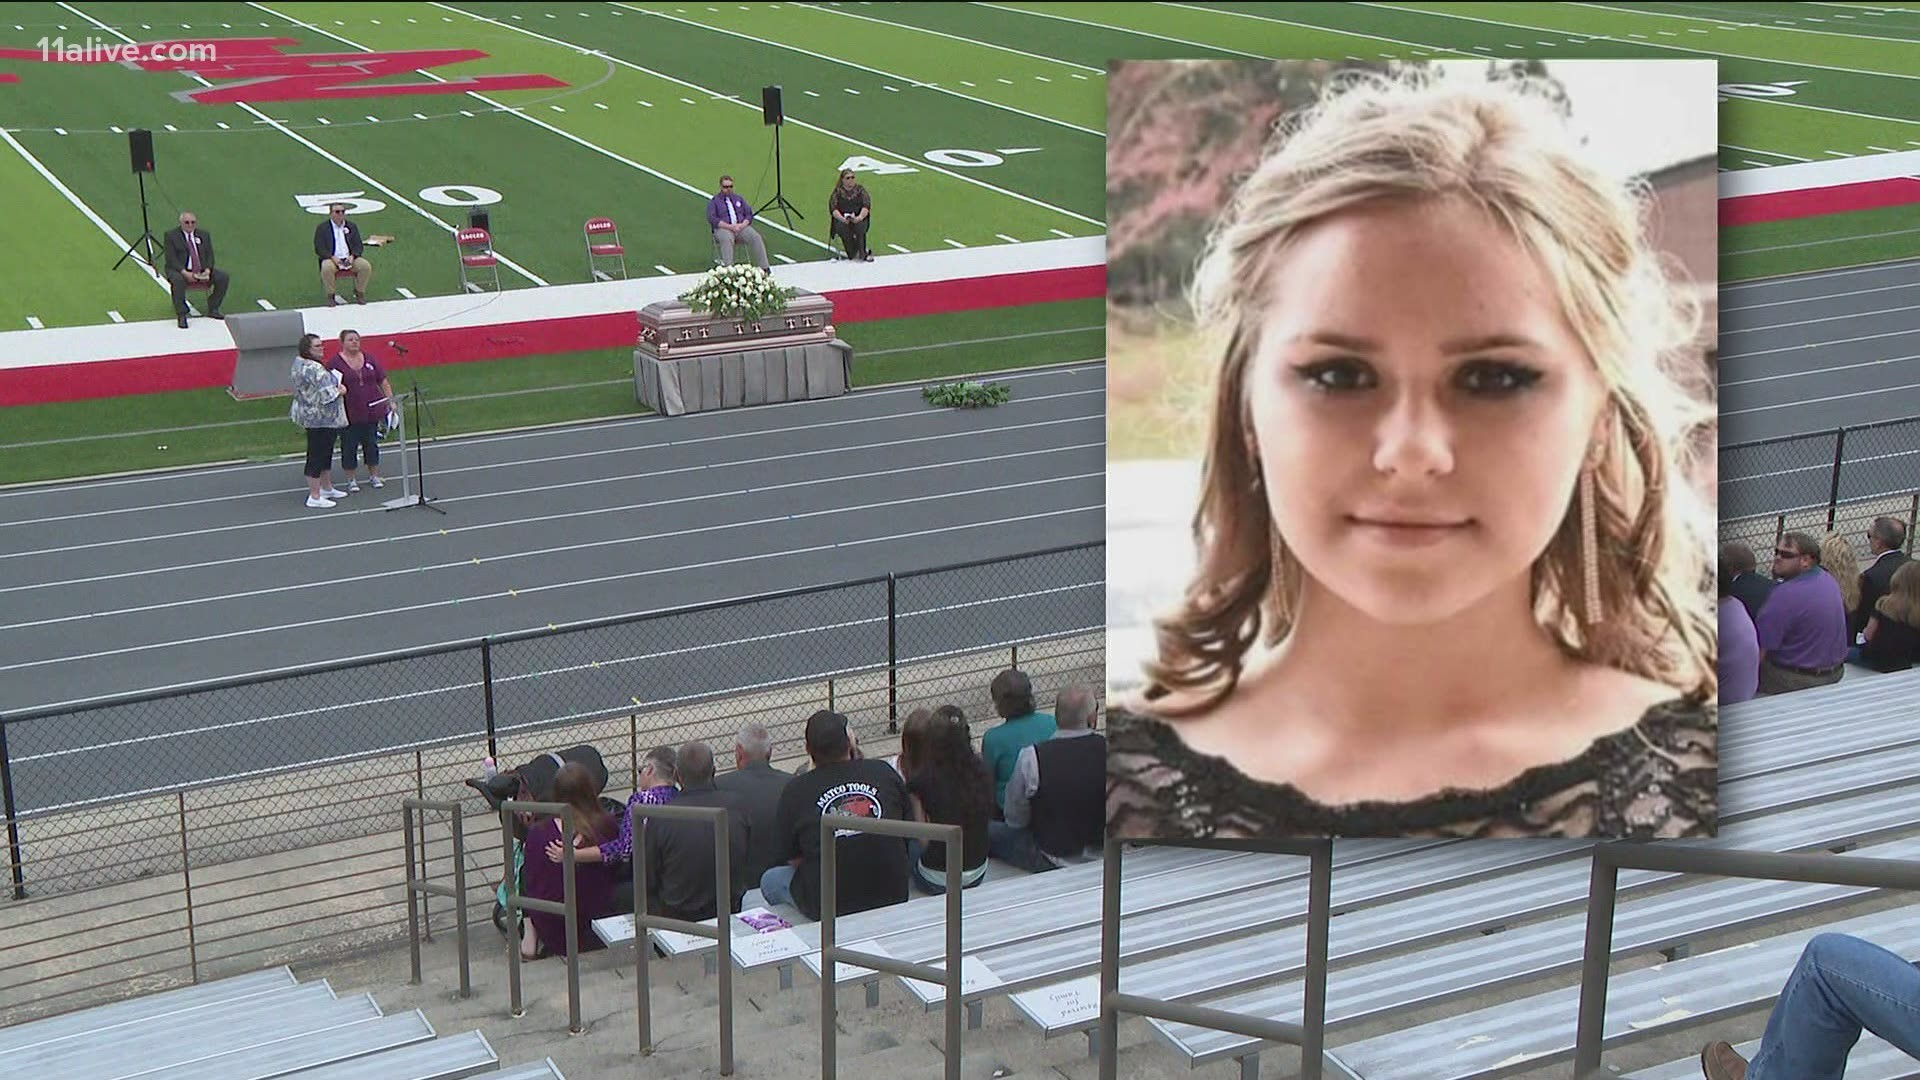 On the Mount Zion High School football field Wednesday, the breeze blew and the sun shone bright on the 50 yard line, where Candace Chrzan's casket was placed.